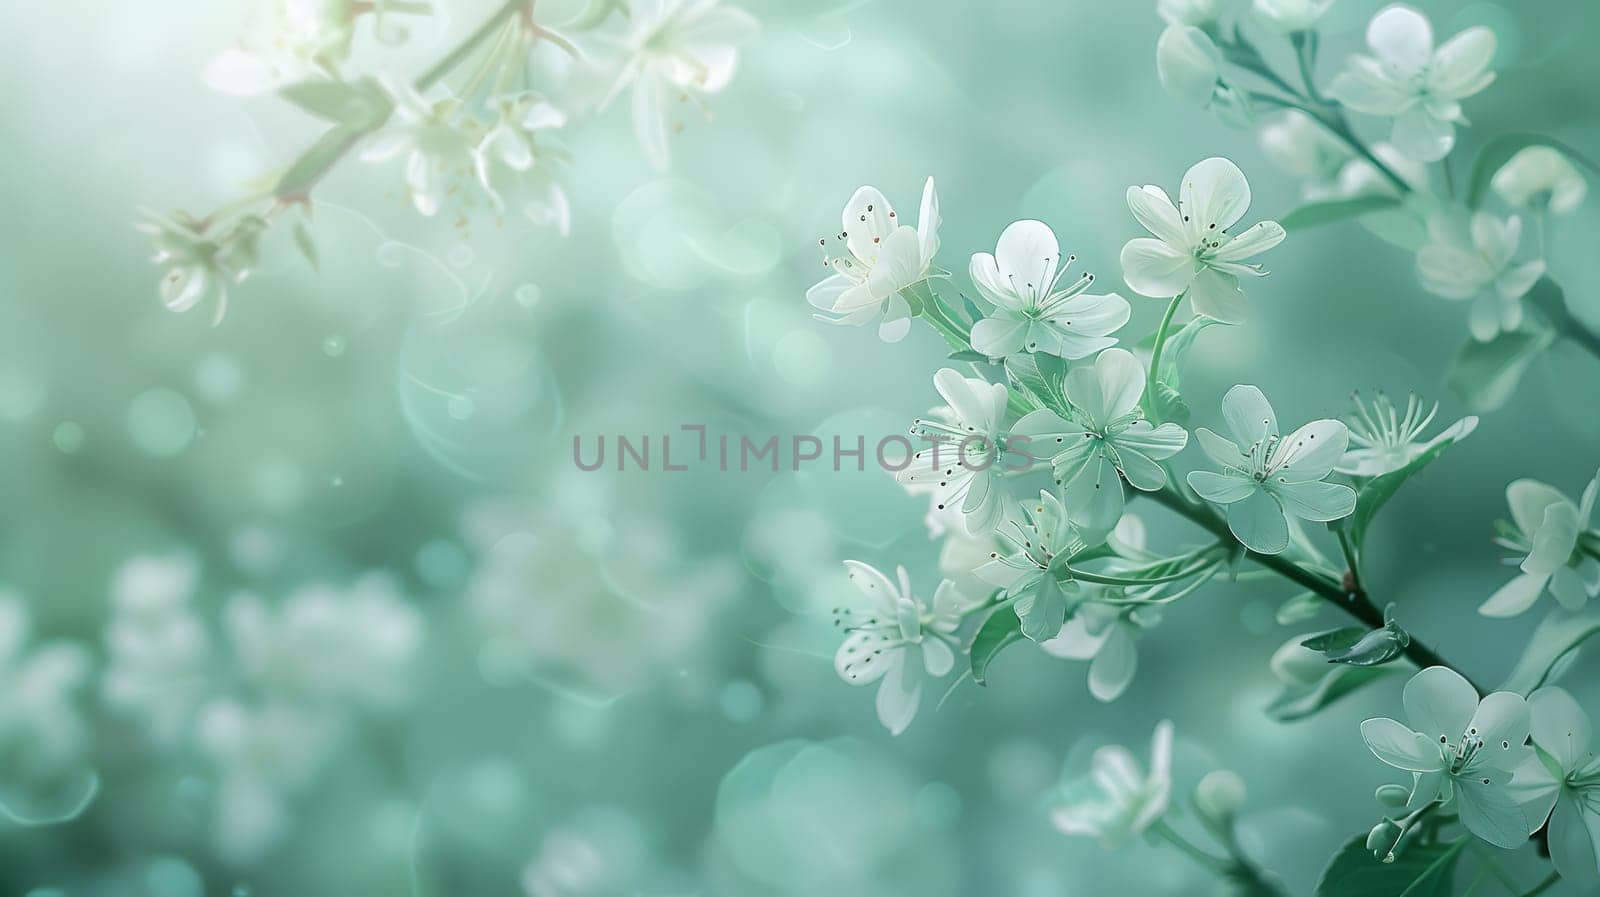 Macro photography of a plants twig with white flowers against a vibrant green background. The sky is electric blue, enhancing the natural landscape